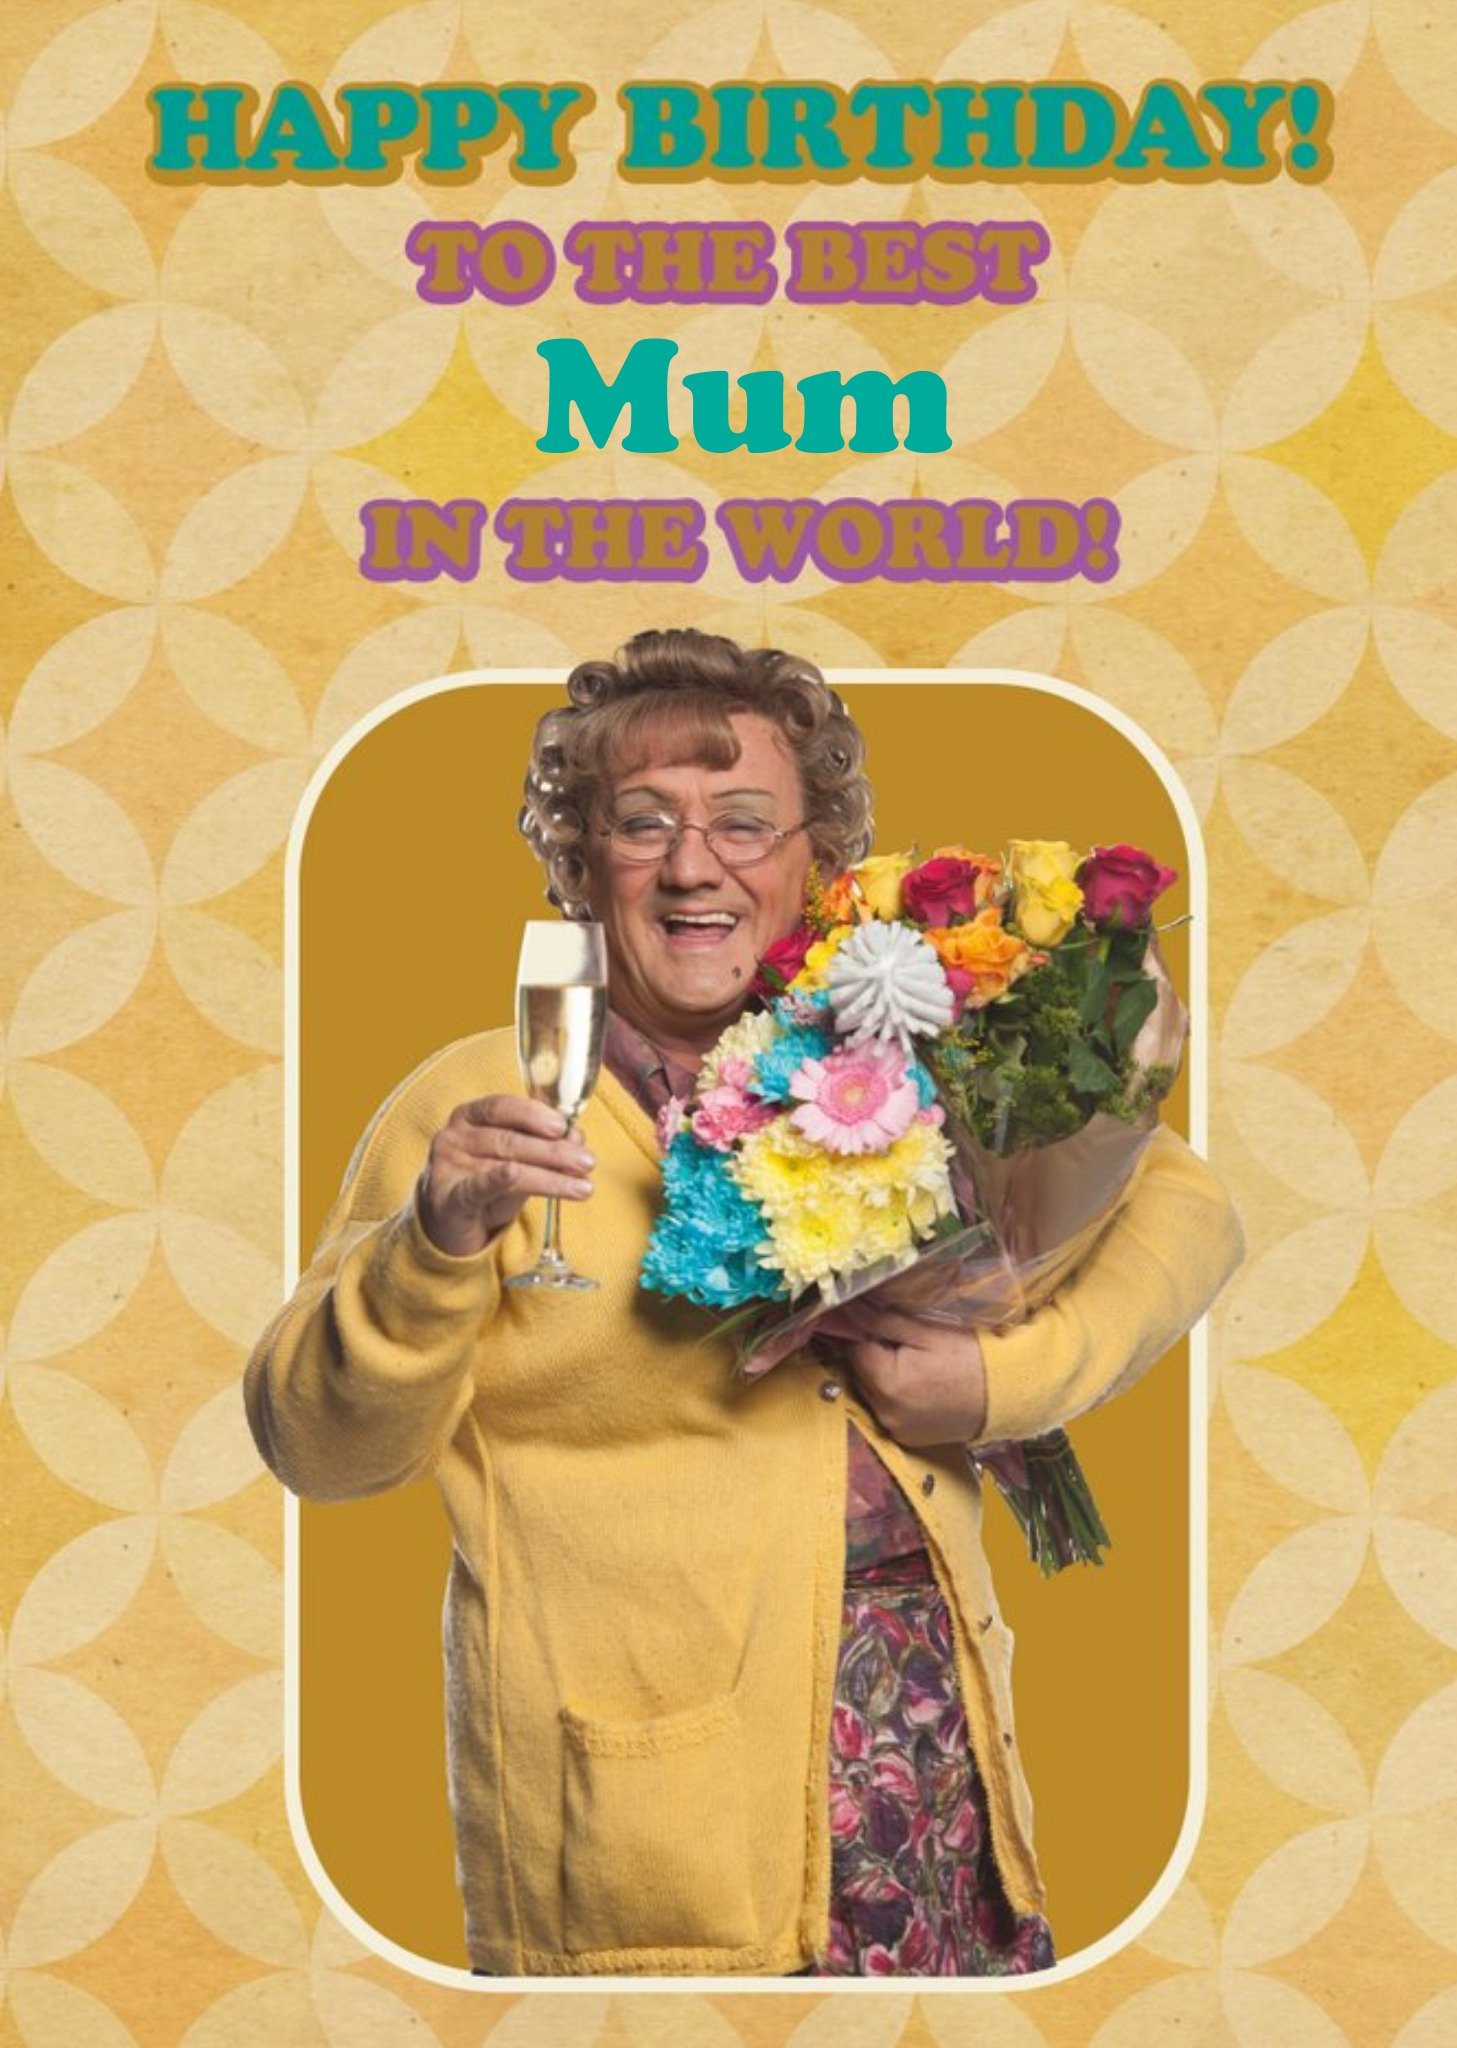 Danilo - Mrs Brown's Boys Happy Birthday To The Best Mum In The World Card, Large